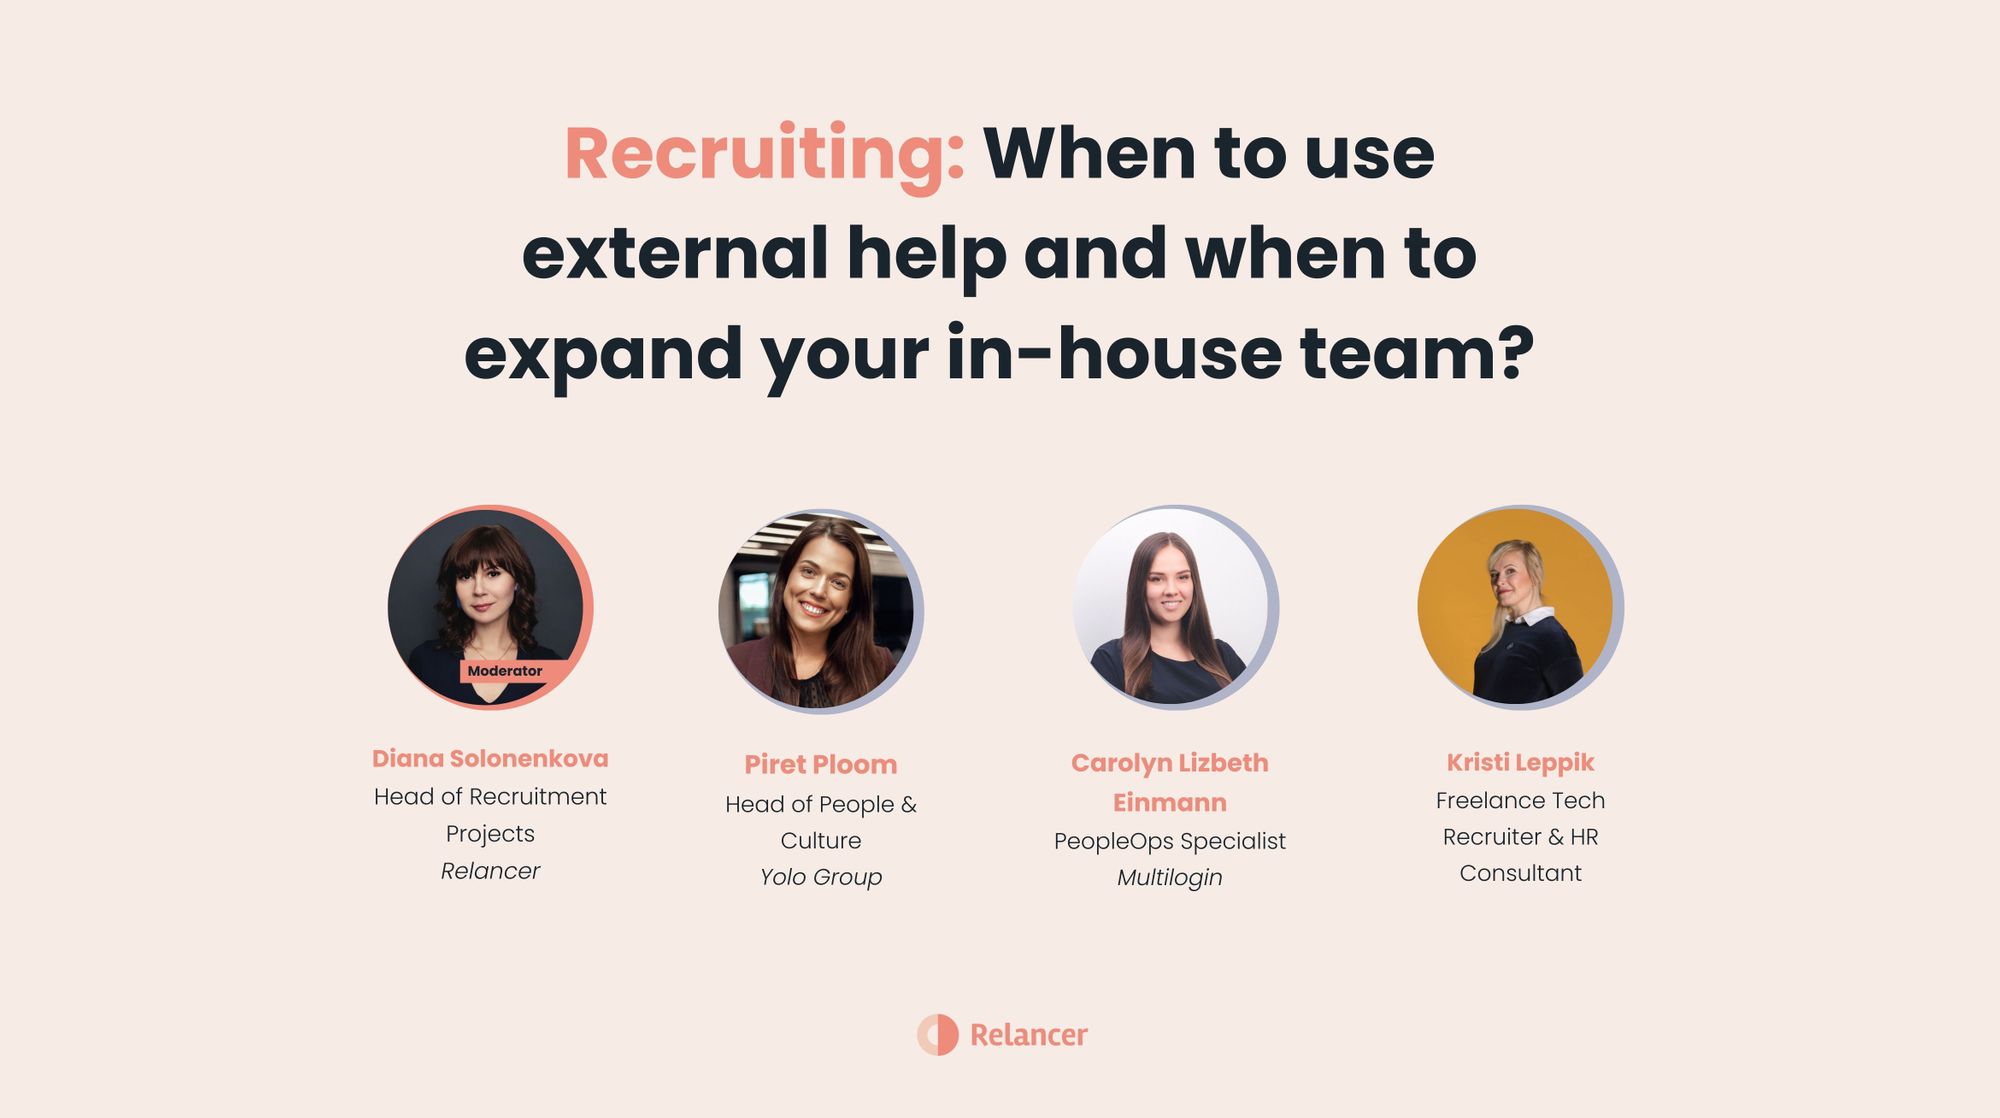 Recruiting: When to use external help and when to expand your in-house team?